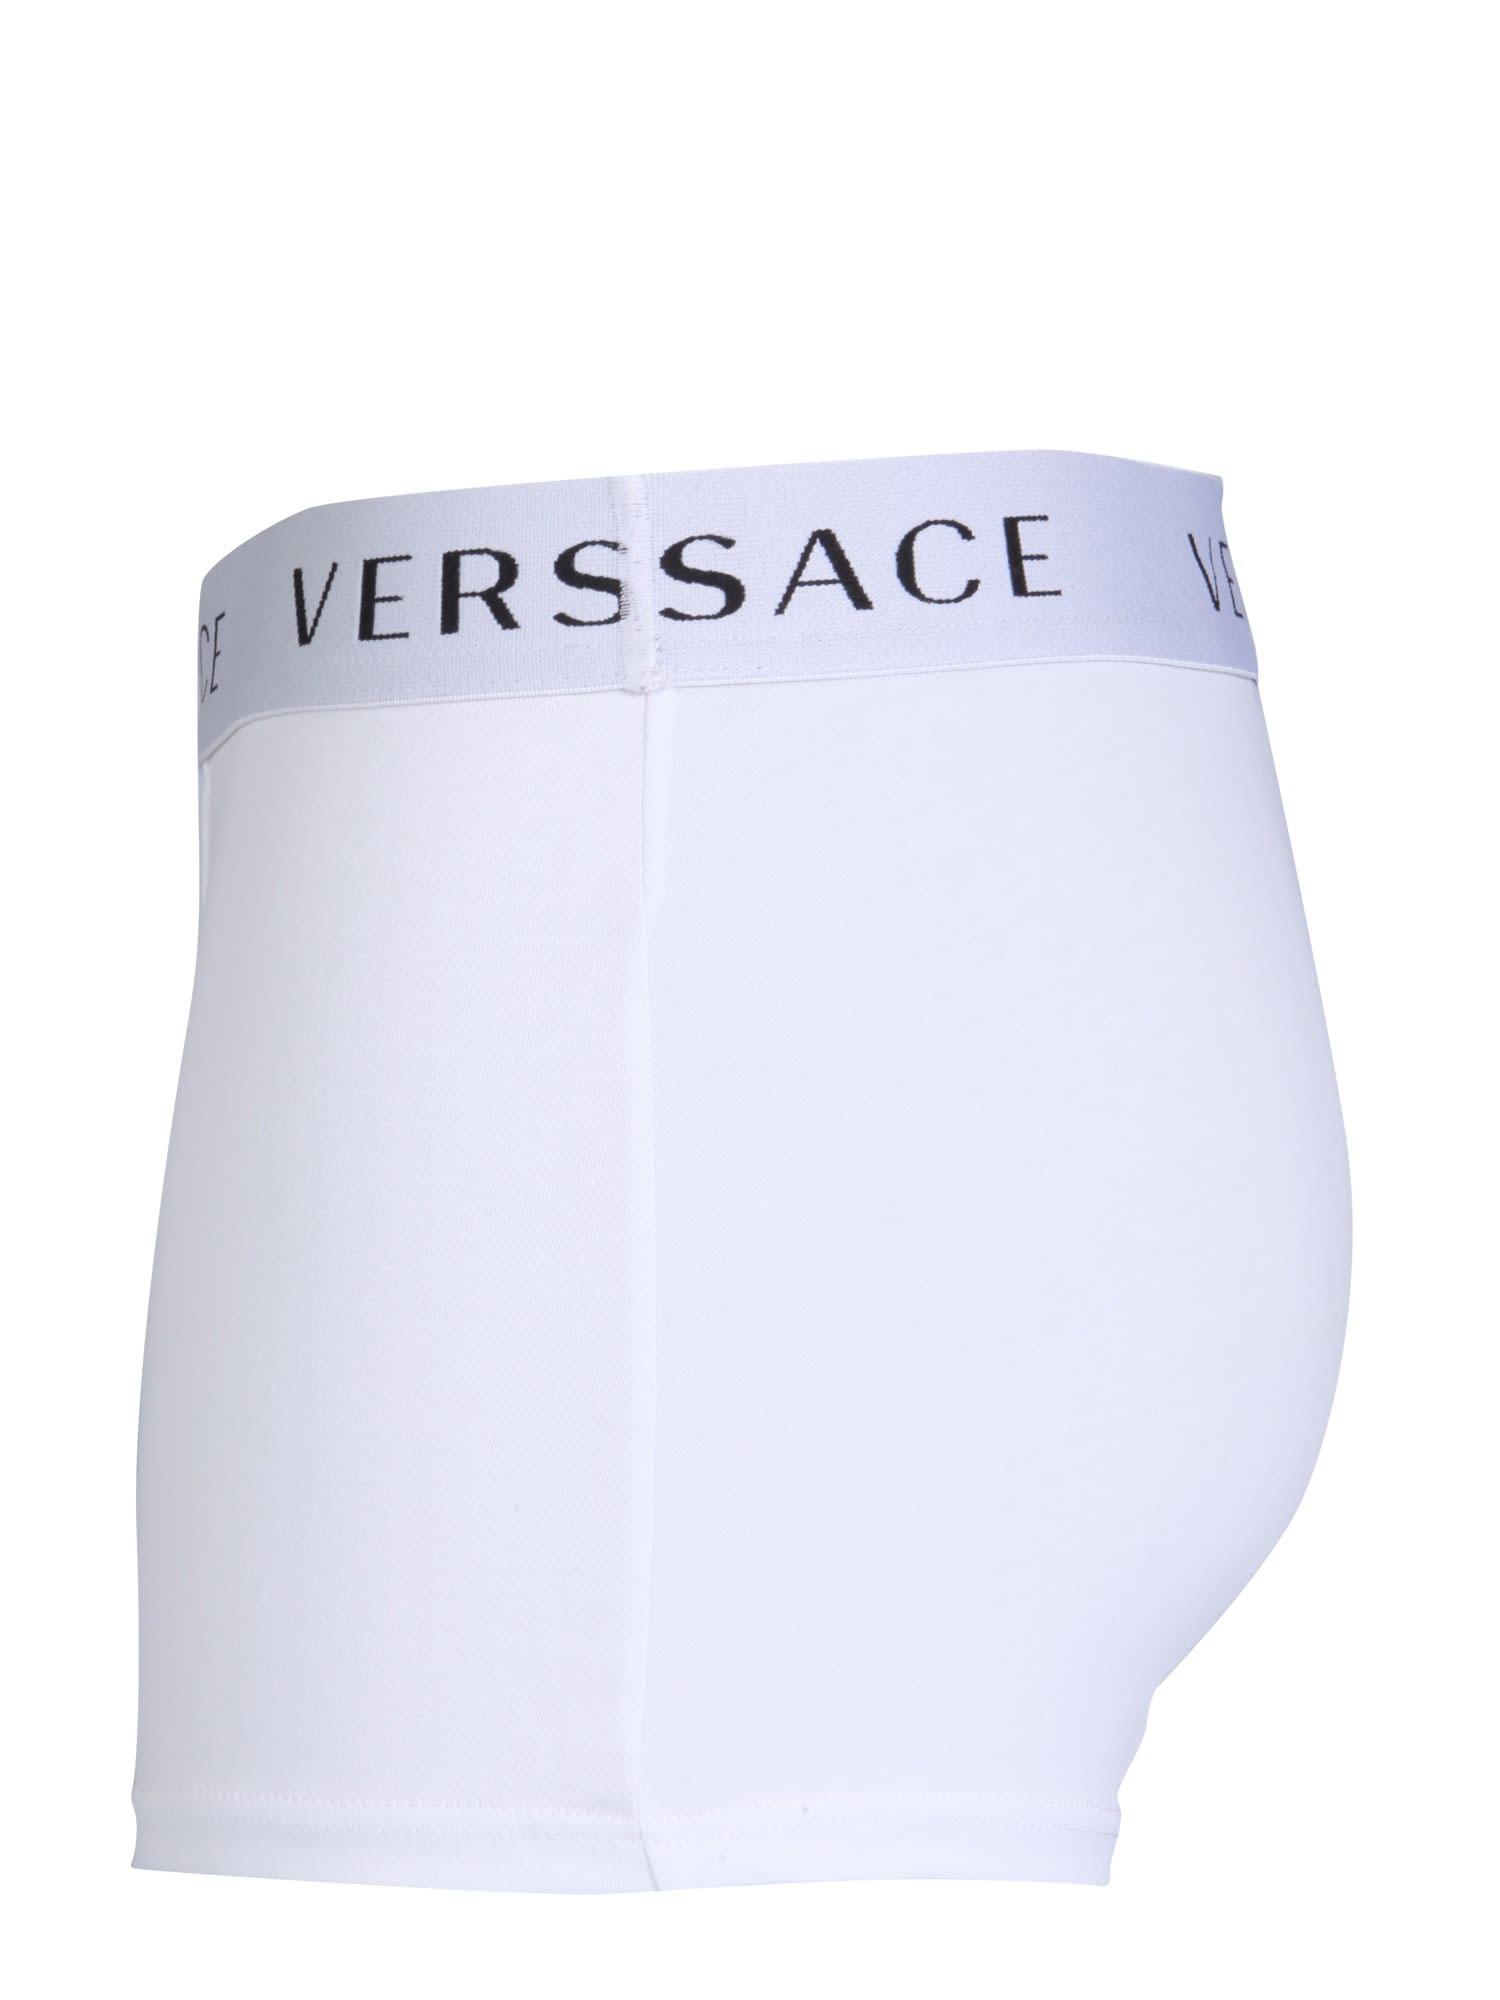 Versace Boxer in White for Men - Save 72% | Lyst